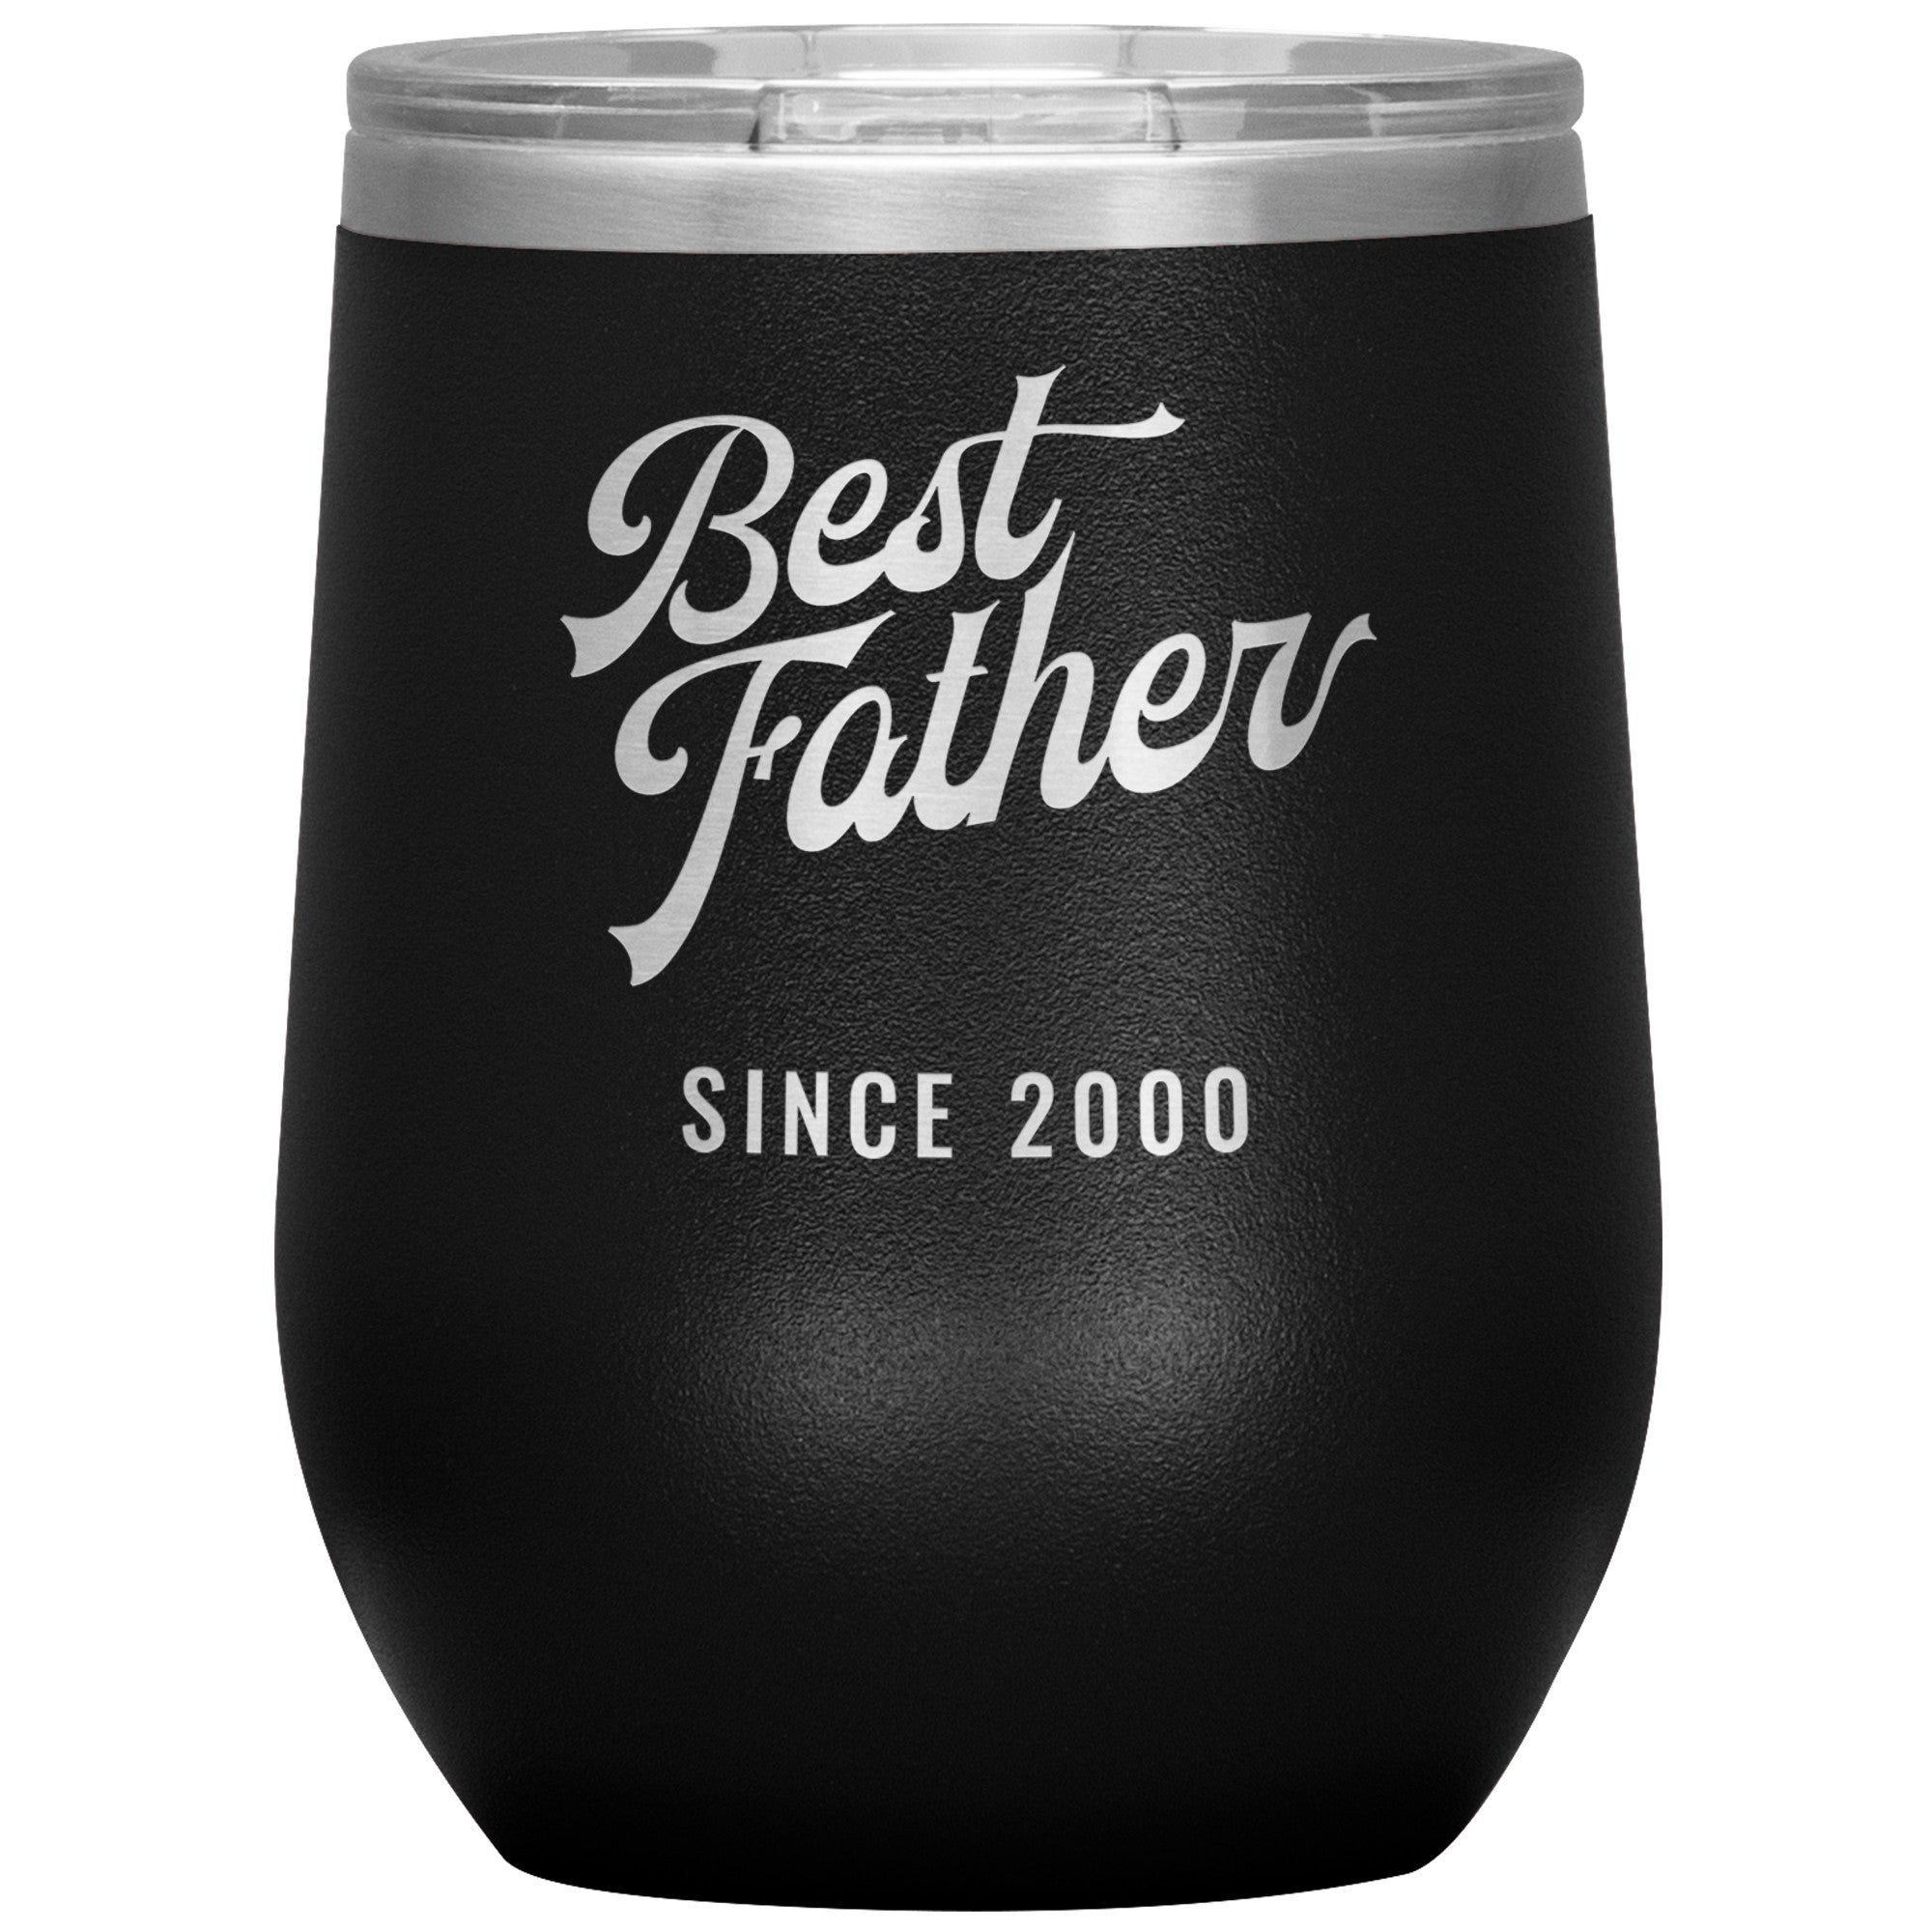 Best Father Since 2000 - 12oz Insulated Wine Tumbler